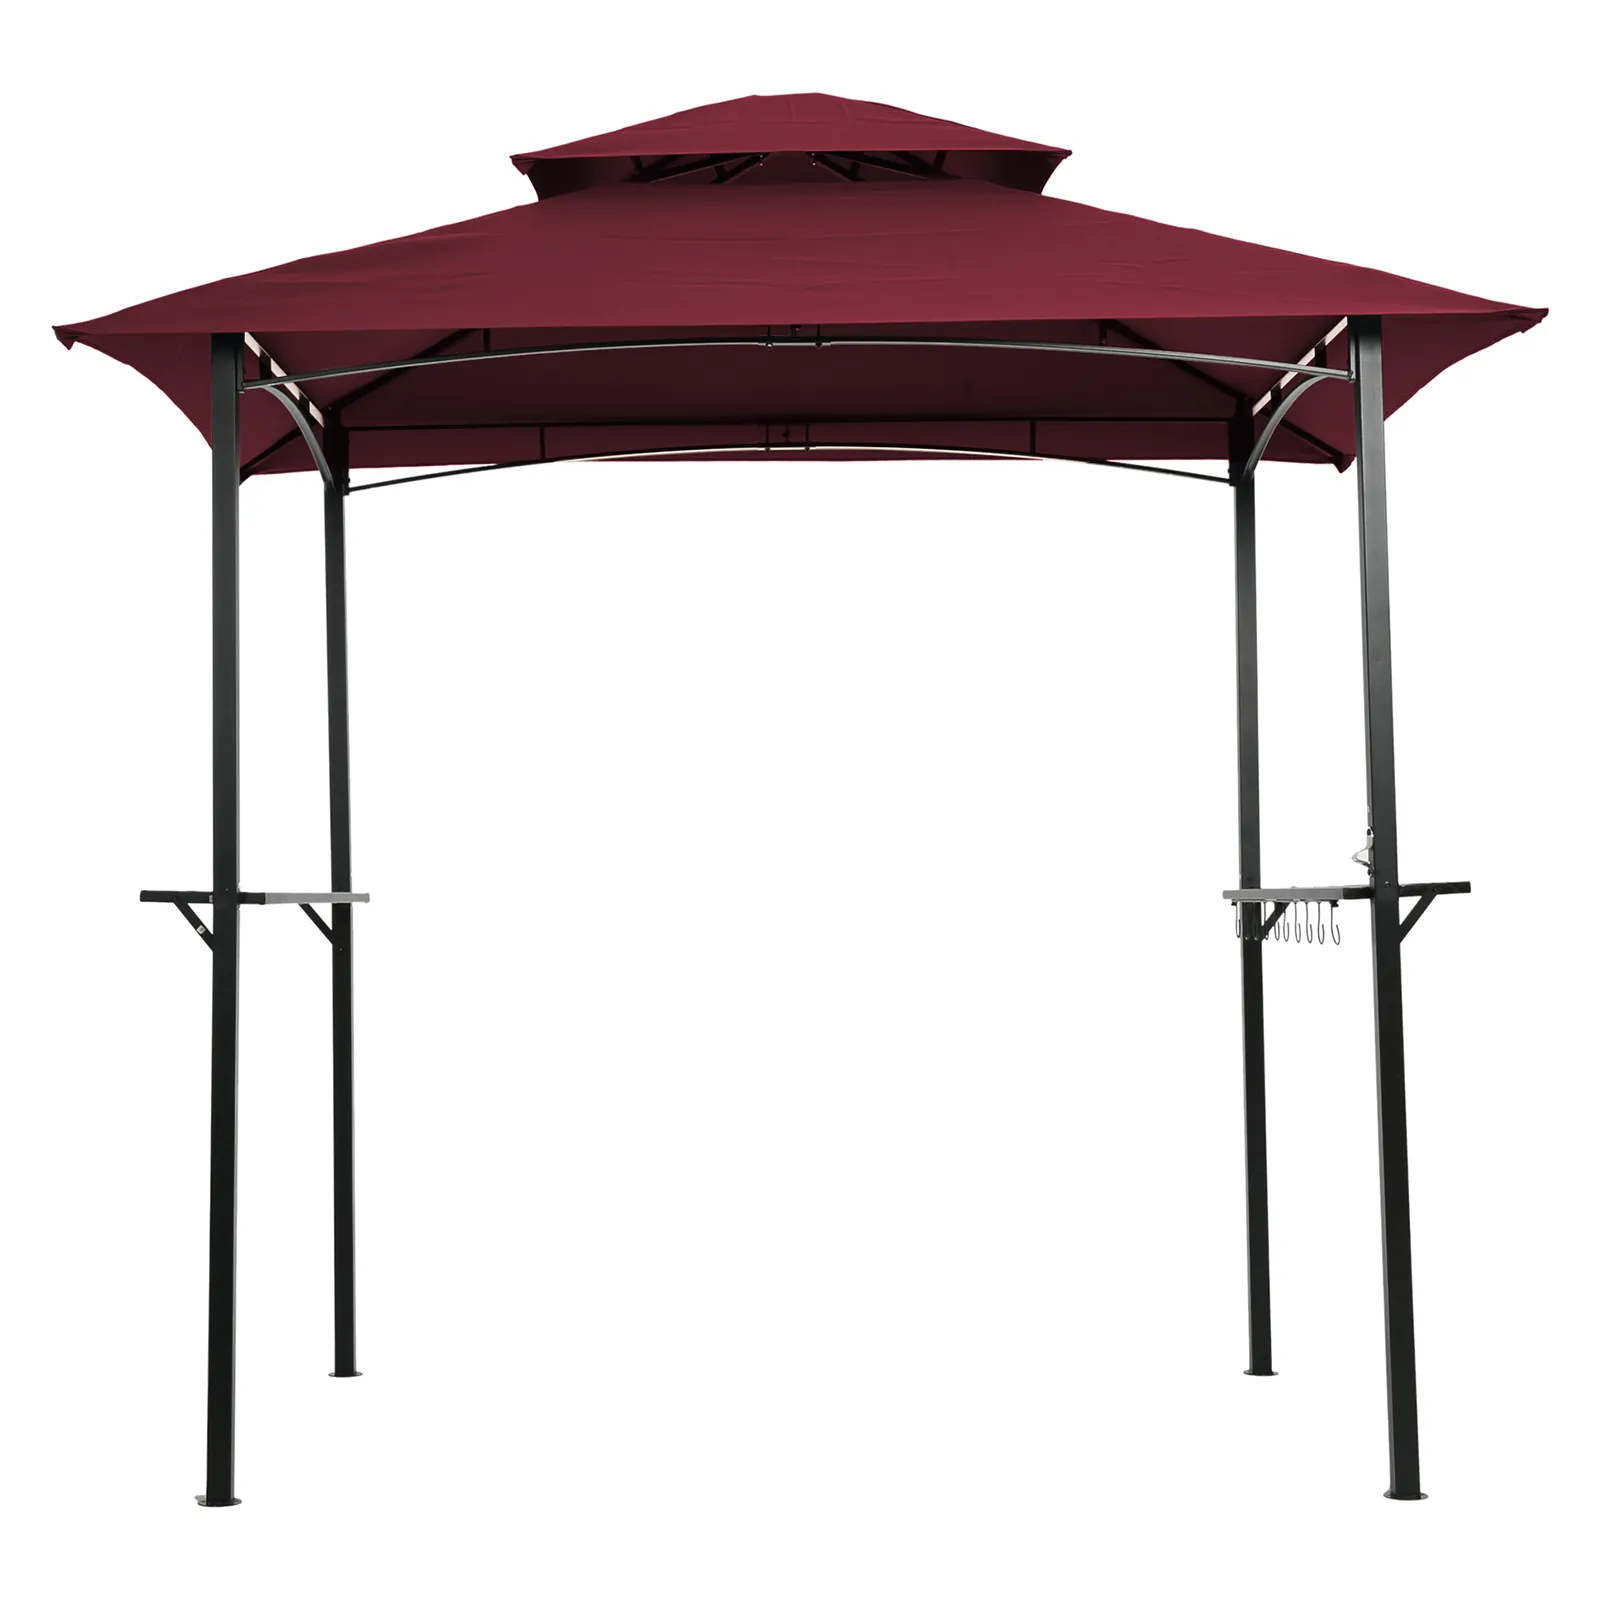 Outdoor Grill Gazebo BBQ Tools Pergolas Bridge Shelter Tält Dubbel Tier Mjuk Top Canopy Steel Frame With Hook and Bar Counters Bourgogne